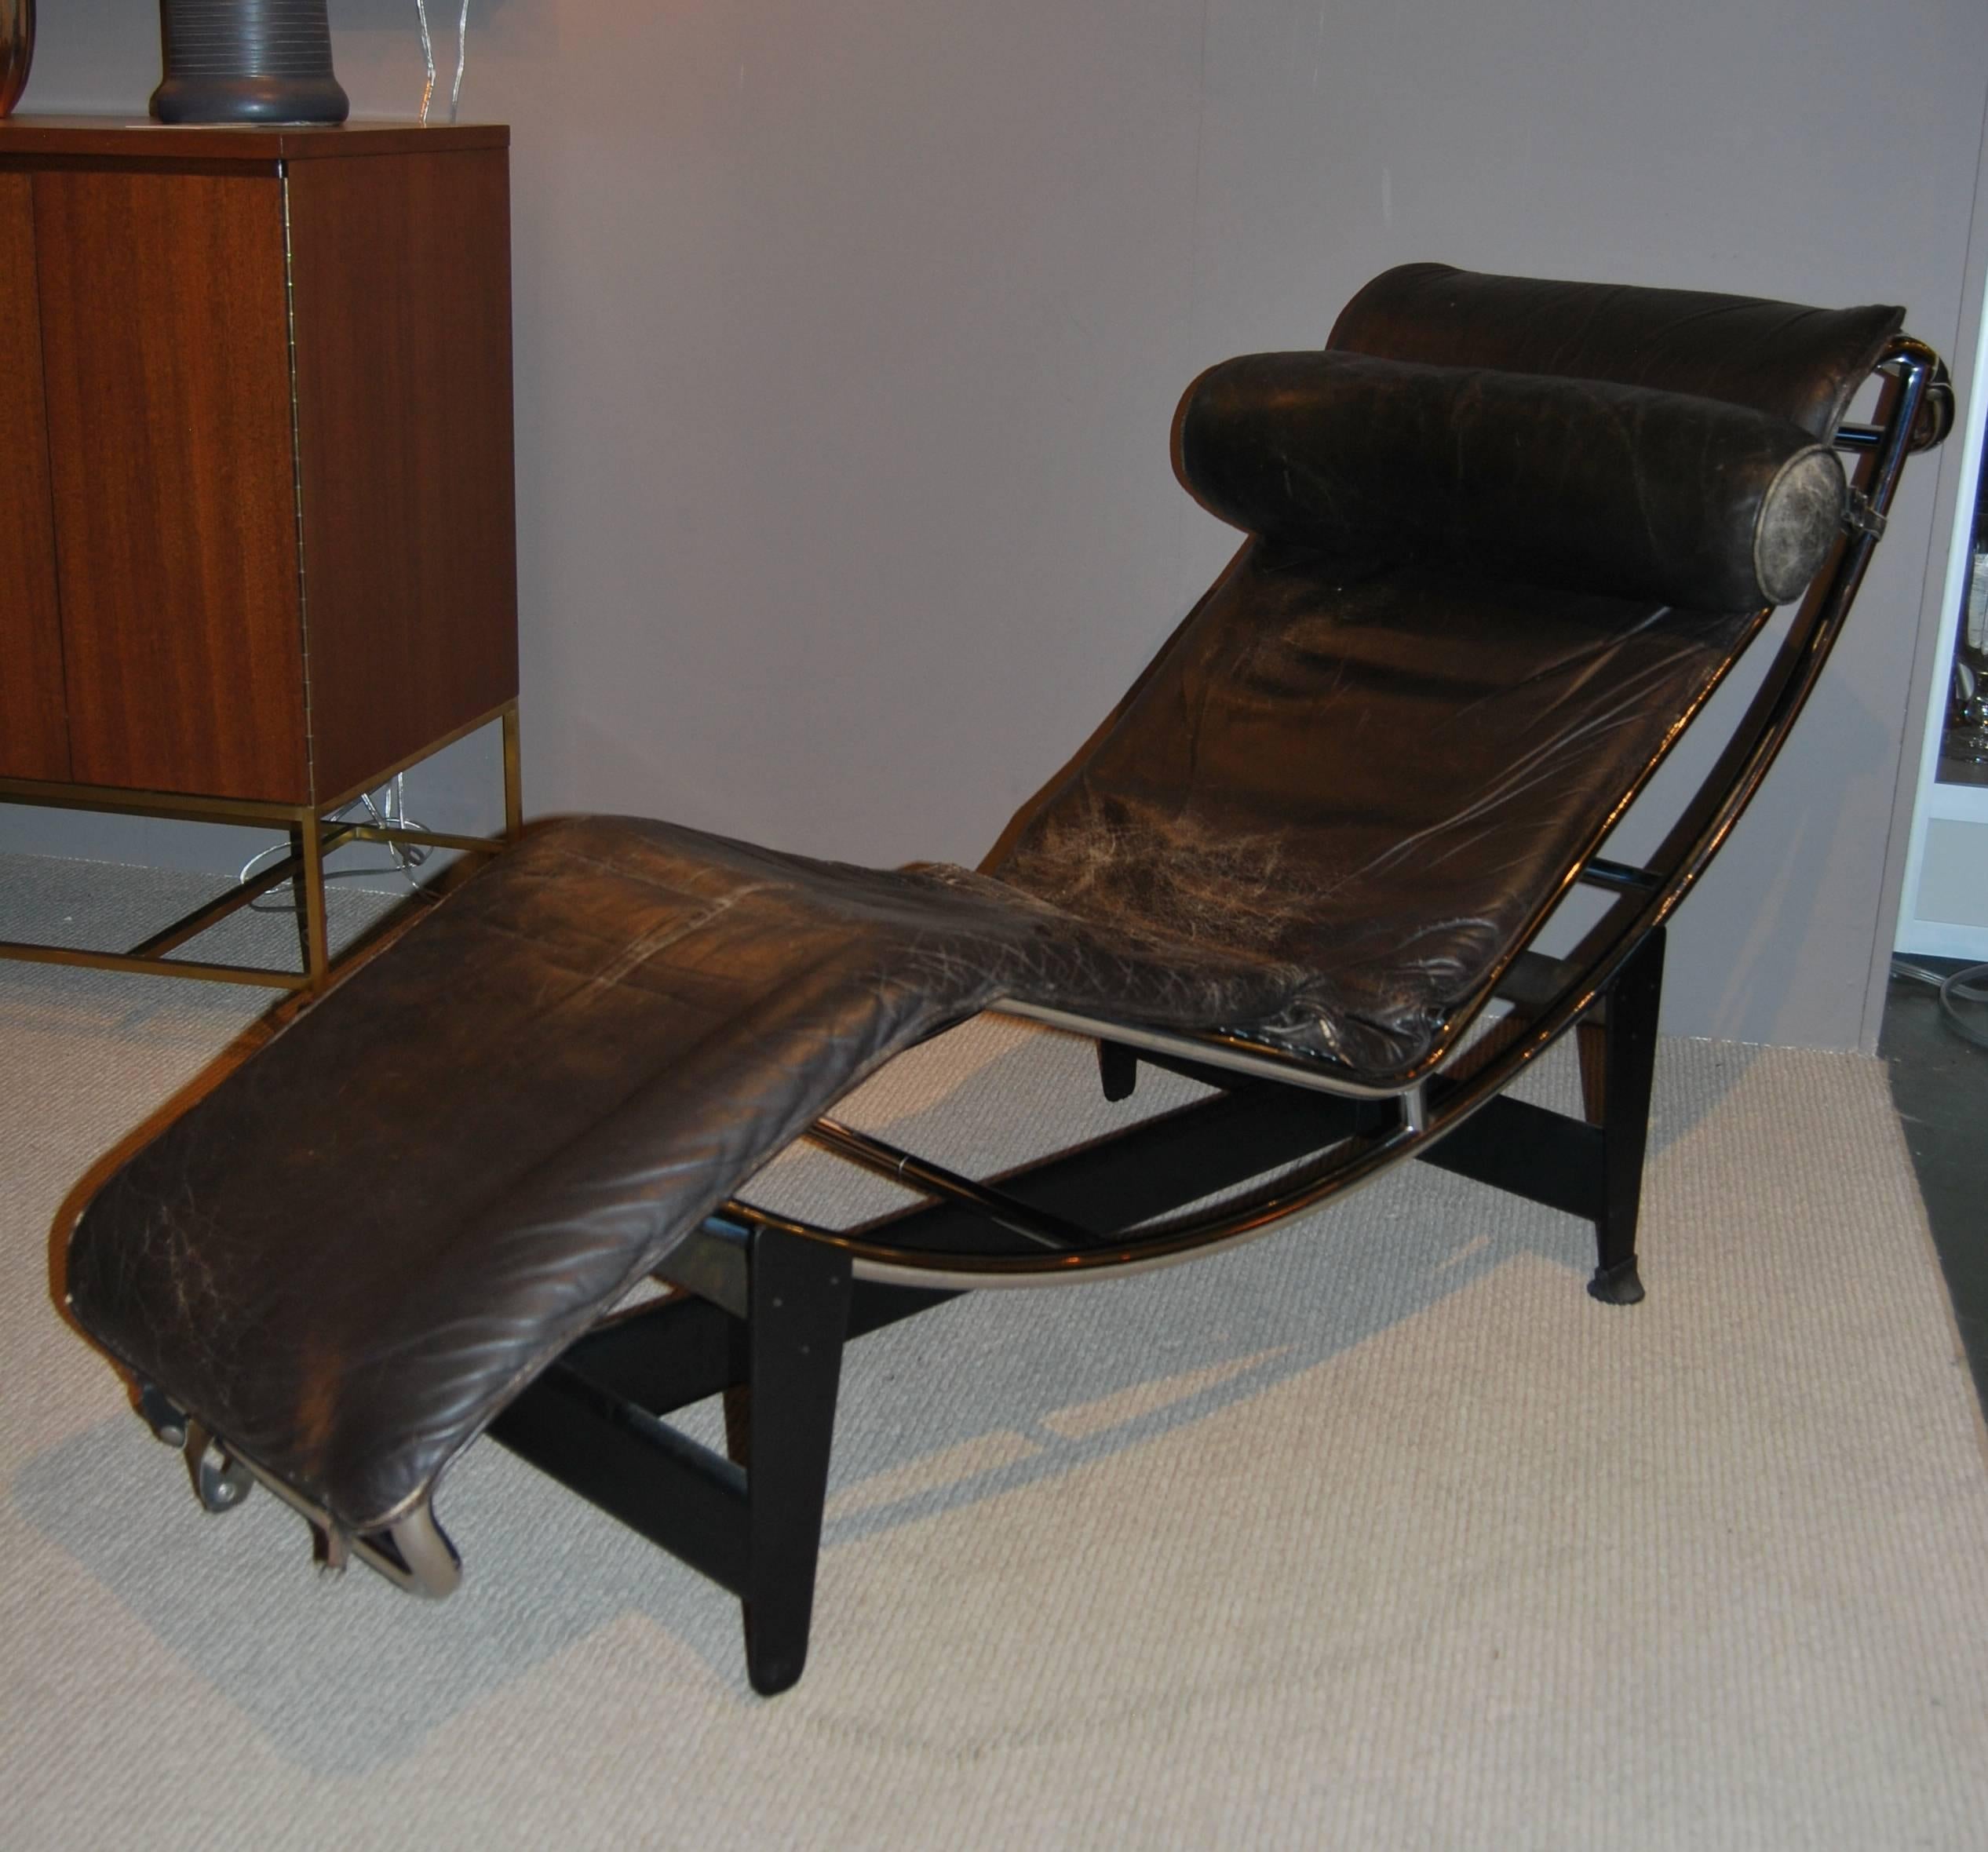 A Le Corbusier for Cassina chaise lounge chair. Leather and chrome chaise lounge with original metal base. Underside of chrome chaise bears original 